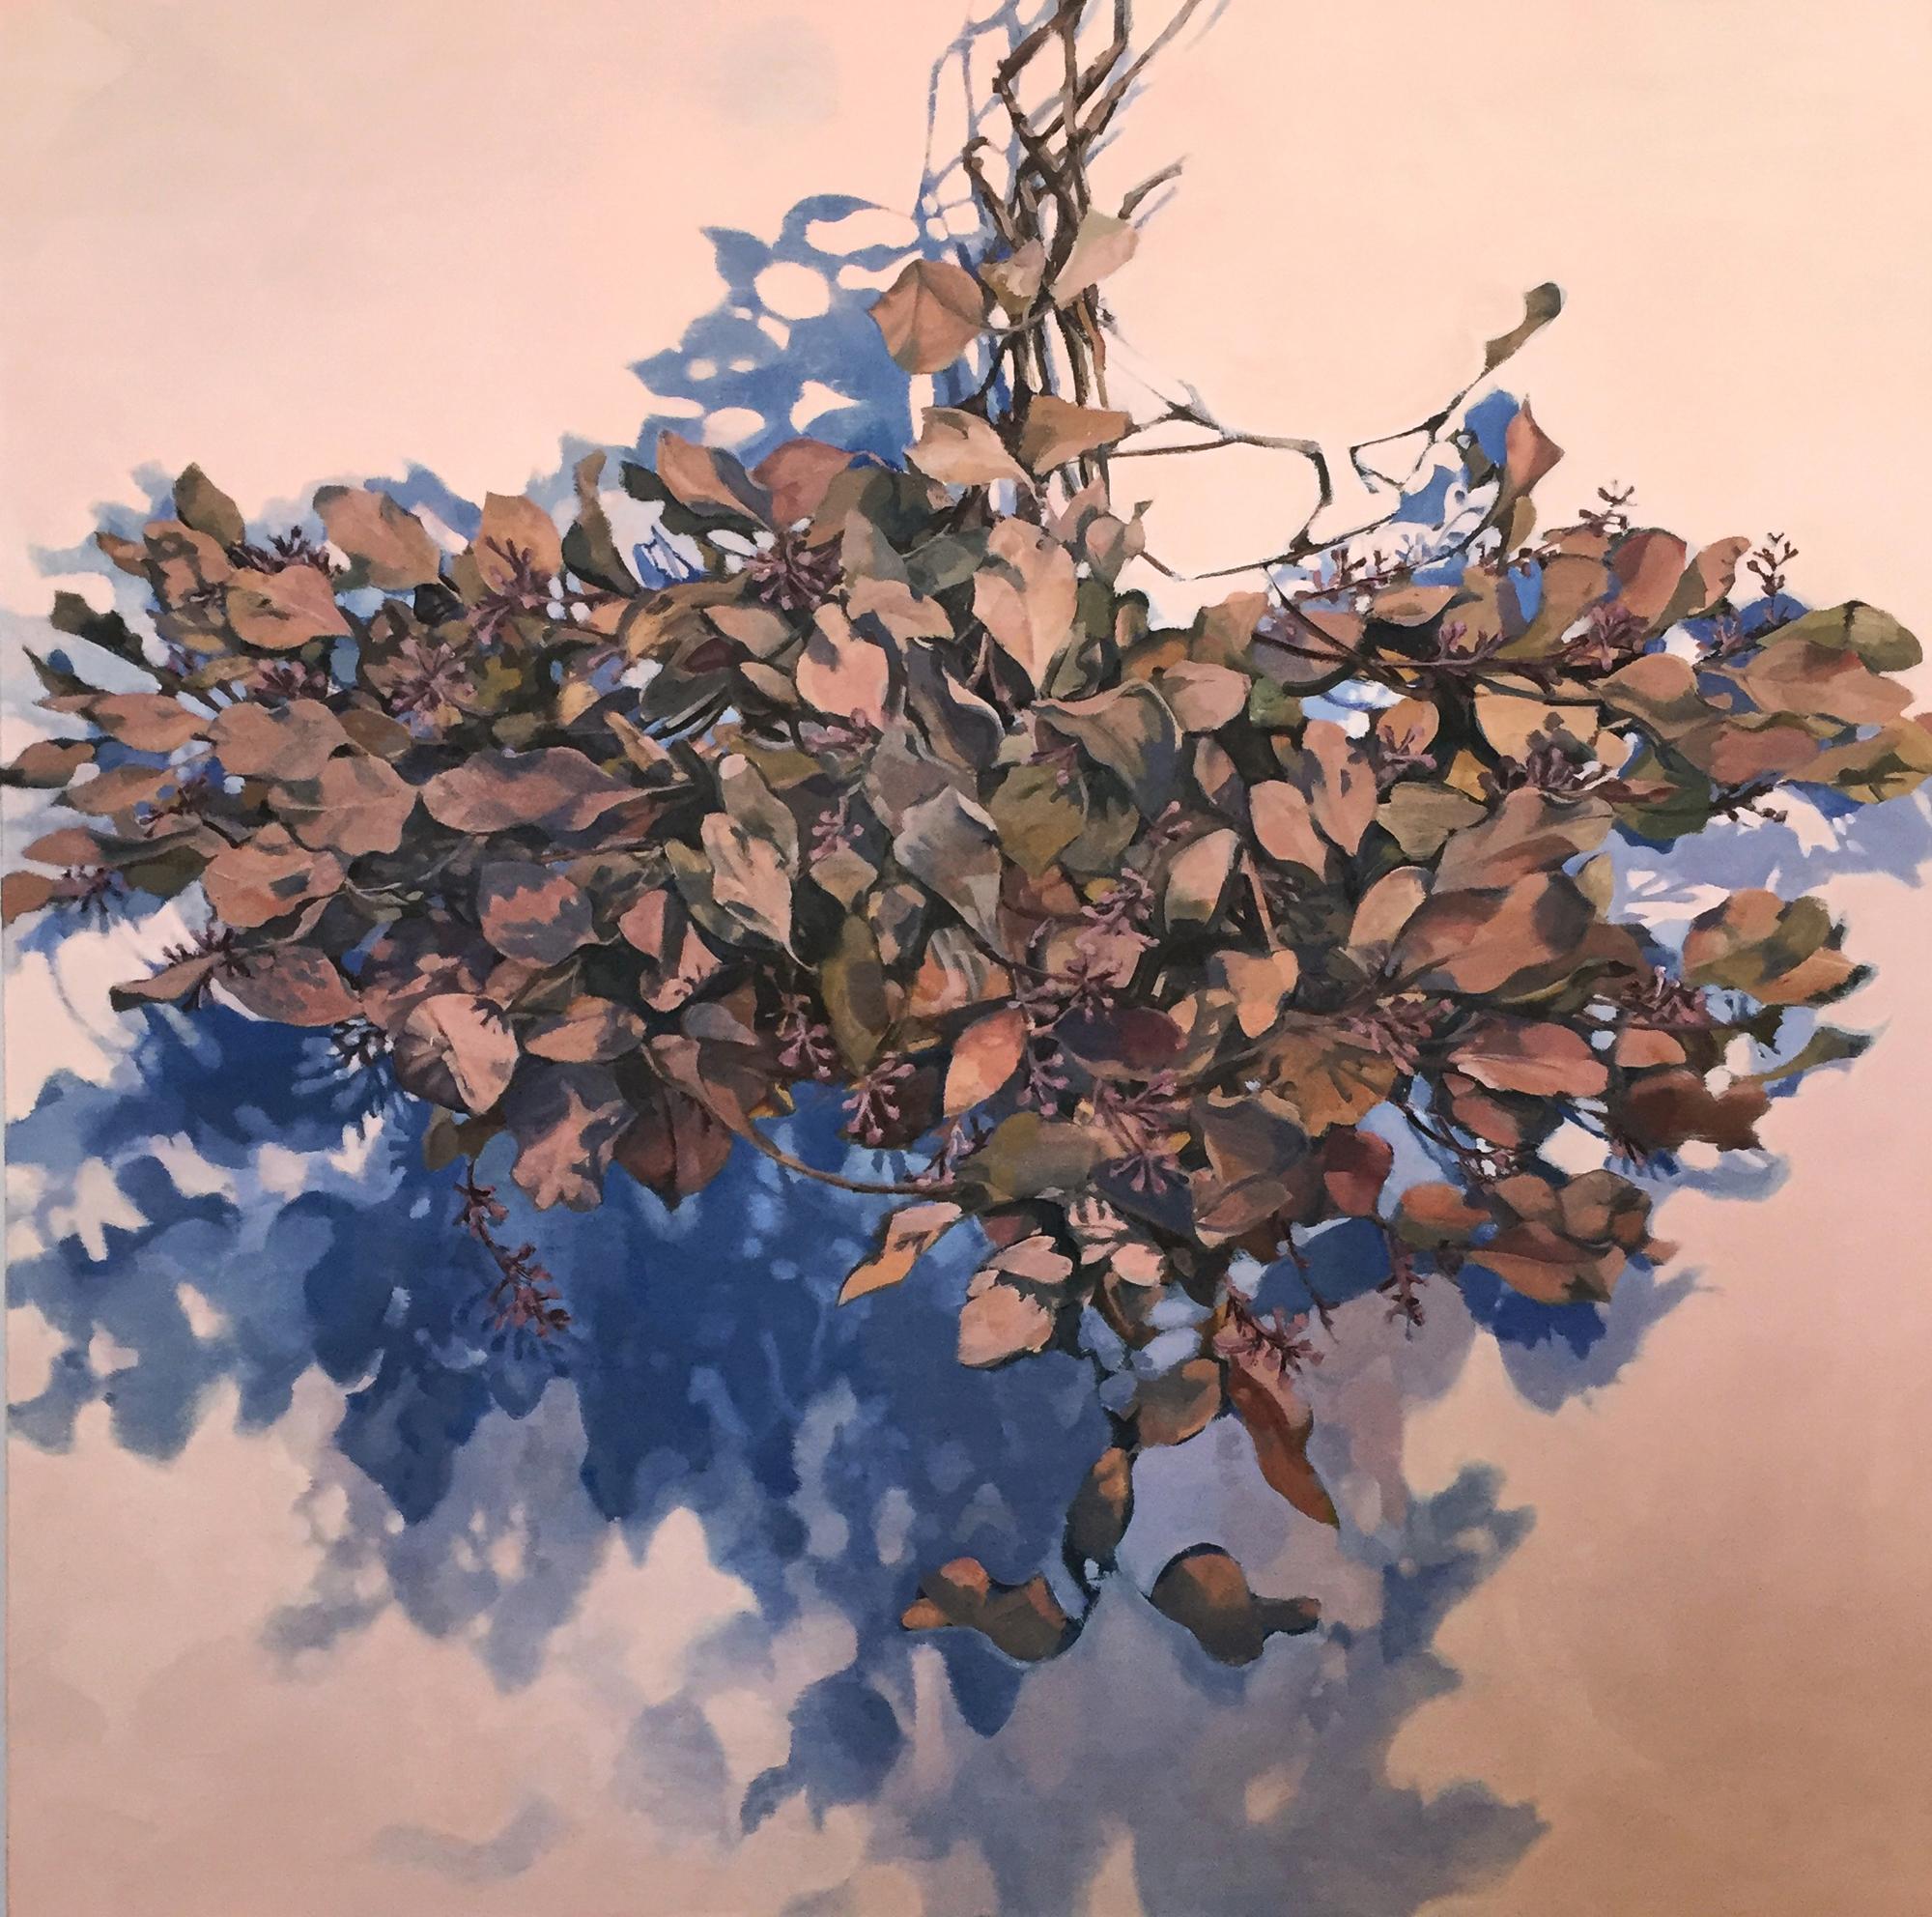 Stephanie Peek Still-Life Painting - Dawnlight / eucalyptus leaves - A natural abstraction through applied realism